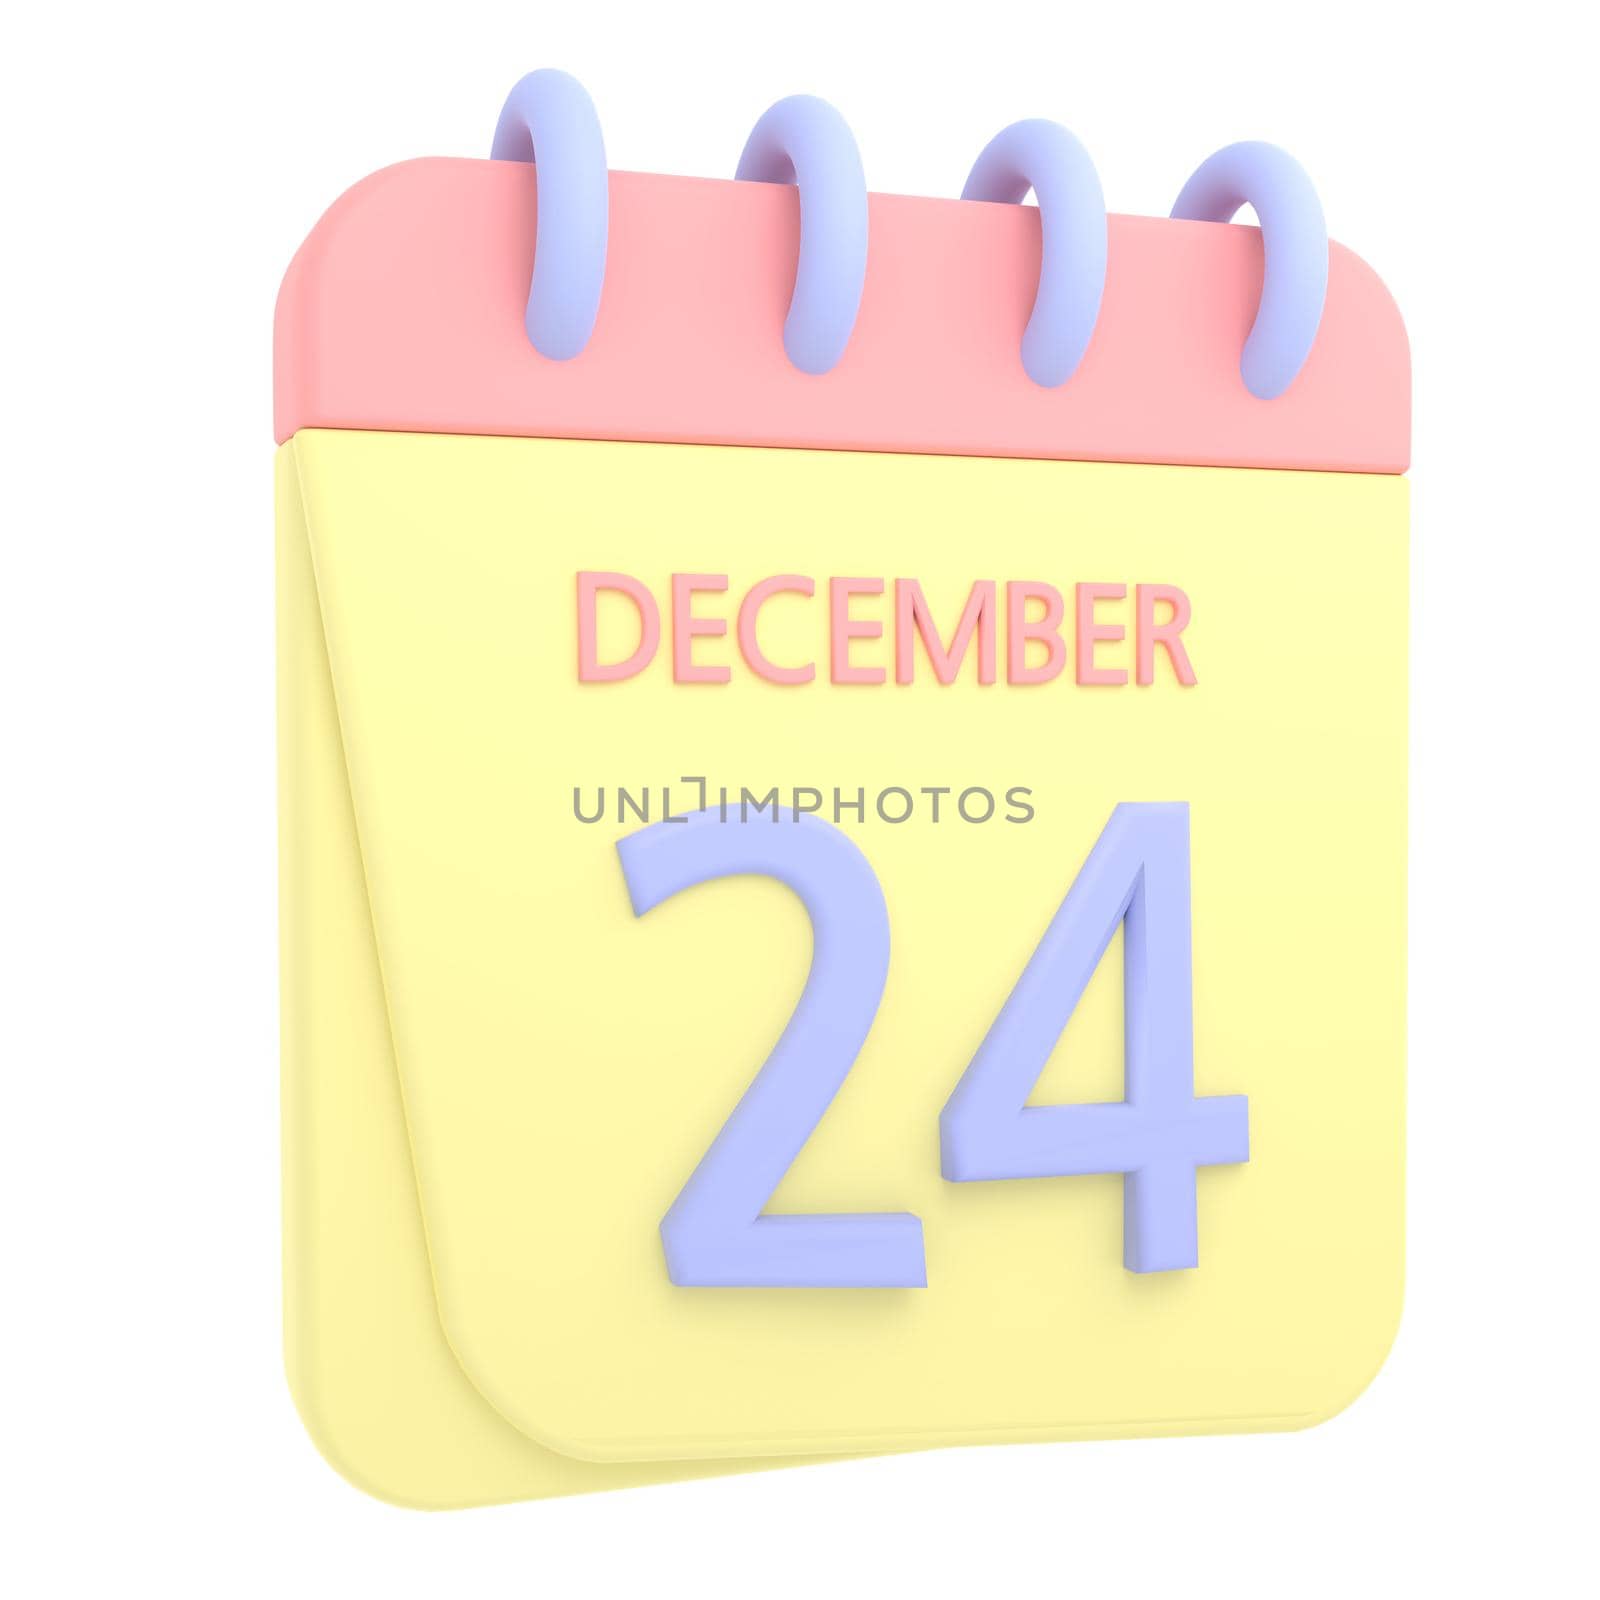 24th December 3D calendar icon. Web style. High resolution image. White background